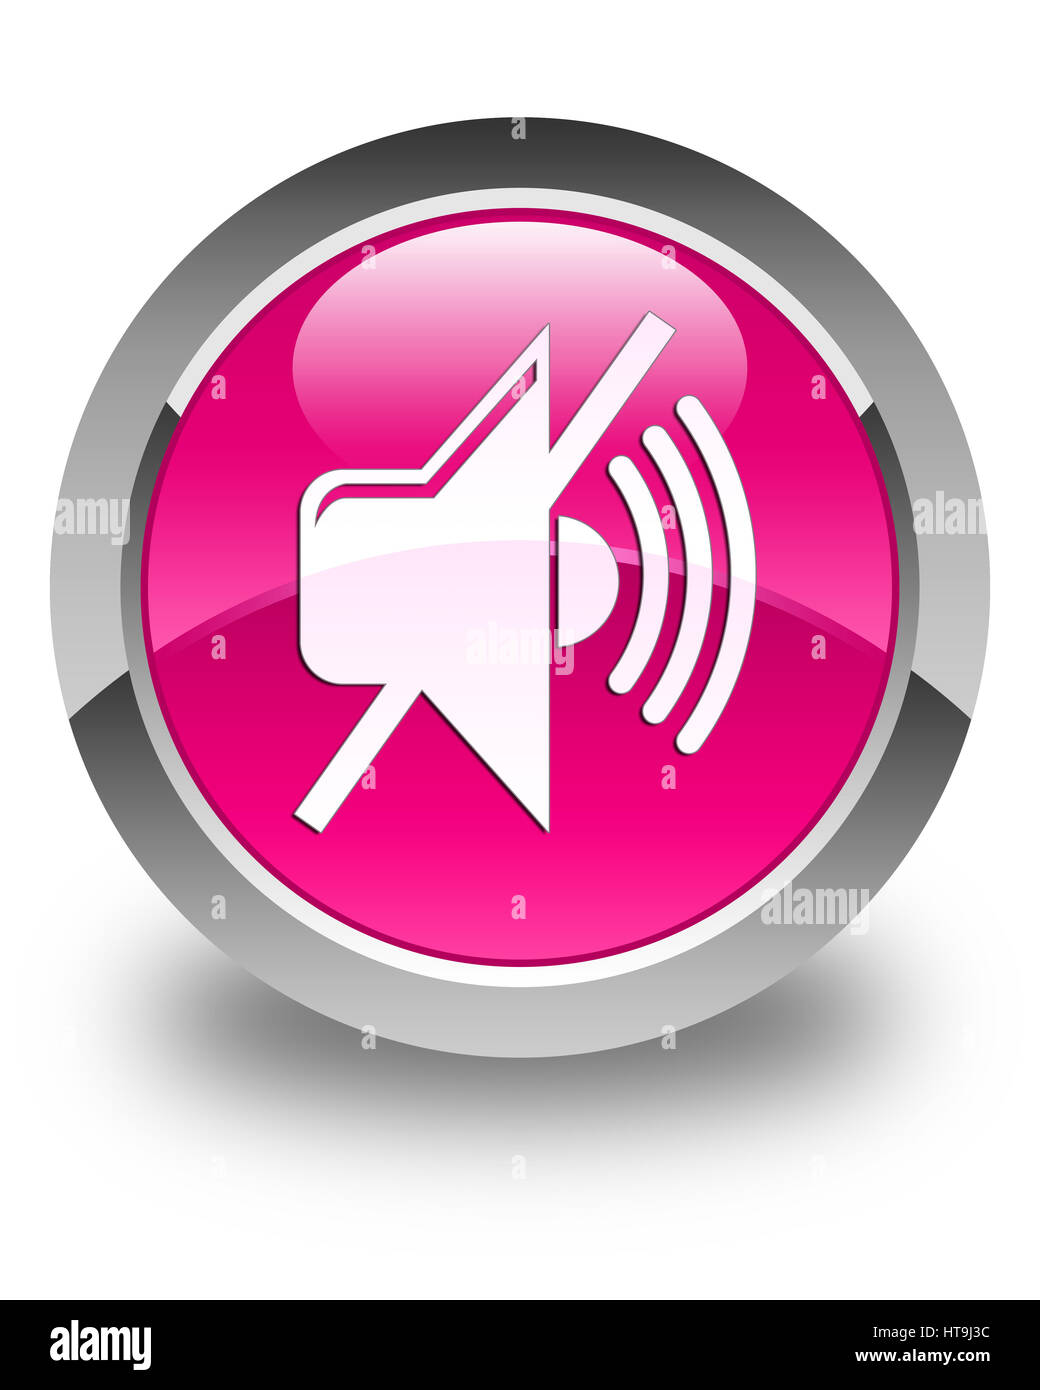 Mute volume icon isolated on glossy pink round button abstract illustration Stock Photo